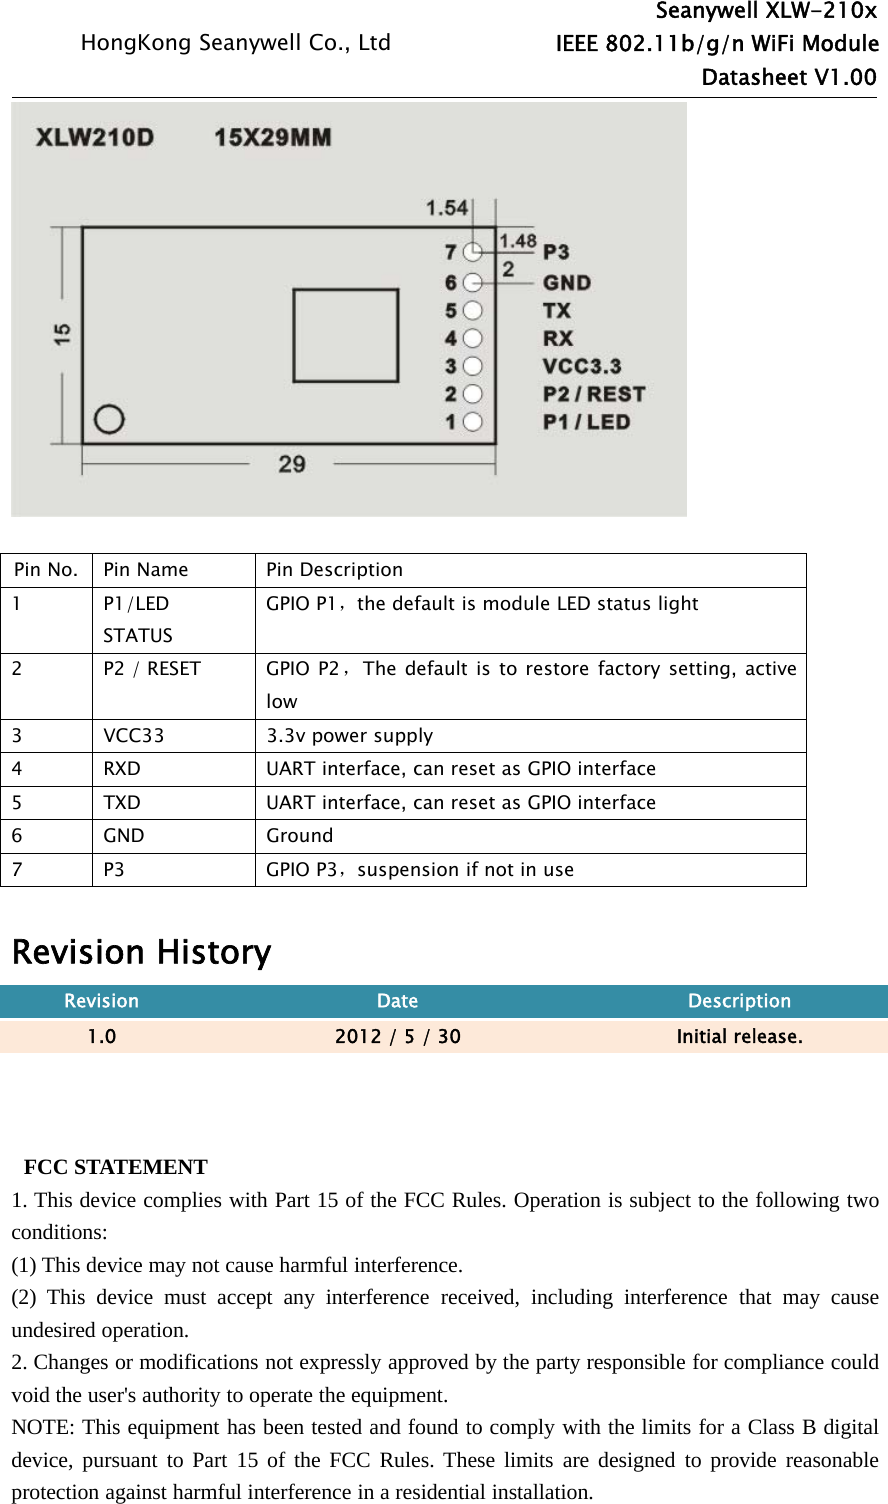 Seanywell XLW-210xHongKong Seanywell Co., Ltd IEEE 802.11b/g/n WiFi ModuleDatasheet V1.00Pin No. Pin Name Pin Description1P1/LEDSTATUSGPIO P1，the default is module LED status light2P2/RESETGPIOP2，The default is to restore factory setting, activelow3 VCC33 3.3v power supply4 RXD UART interface, can reset as GPIO interface5 TXD UART interface, can reset as GPIO interface6GND Ground7P3 GPIOP3，suspension if not in useRevision HistoryRevision Date Description1.0 2012 / 5 / 30 Initial release.FCC STATEMENT1. This device complies with Part 15 of the FCC Rules. Operation is subject to the following twoconditions:(1) This device may not cause harmful interference.(2) This device must accept any interference received, including interference that may causeundesired operation.2. Changes or modifications not expressly approved by the party responsible for compliance couldvoid the user&apos;s authority to operate the equipment.NOTE: This equipment has been tested and found to comply with the limits for a Class B digitaldevice, pursuant to Part 15 of the FCC Rules. These limits are designed to provide reasonableprotection against harmful interference in a residential installation.